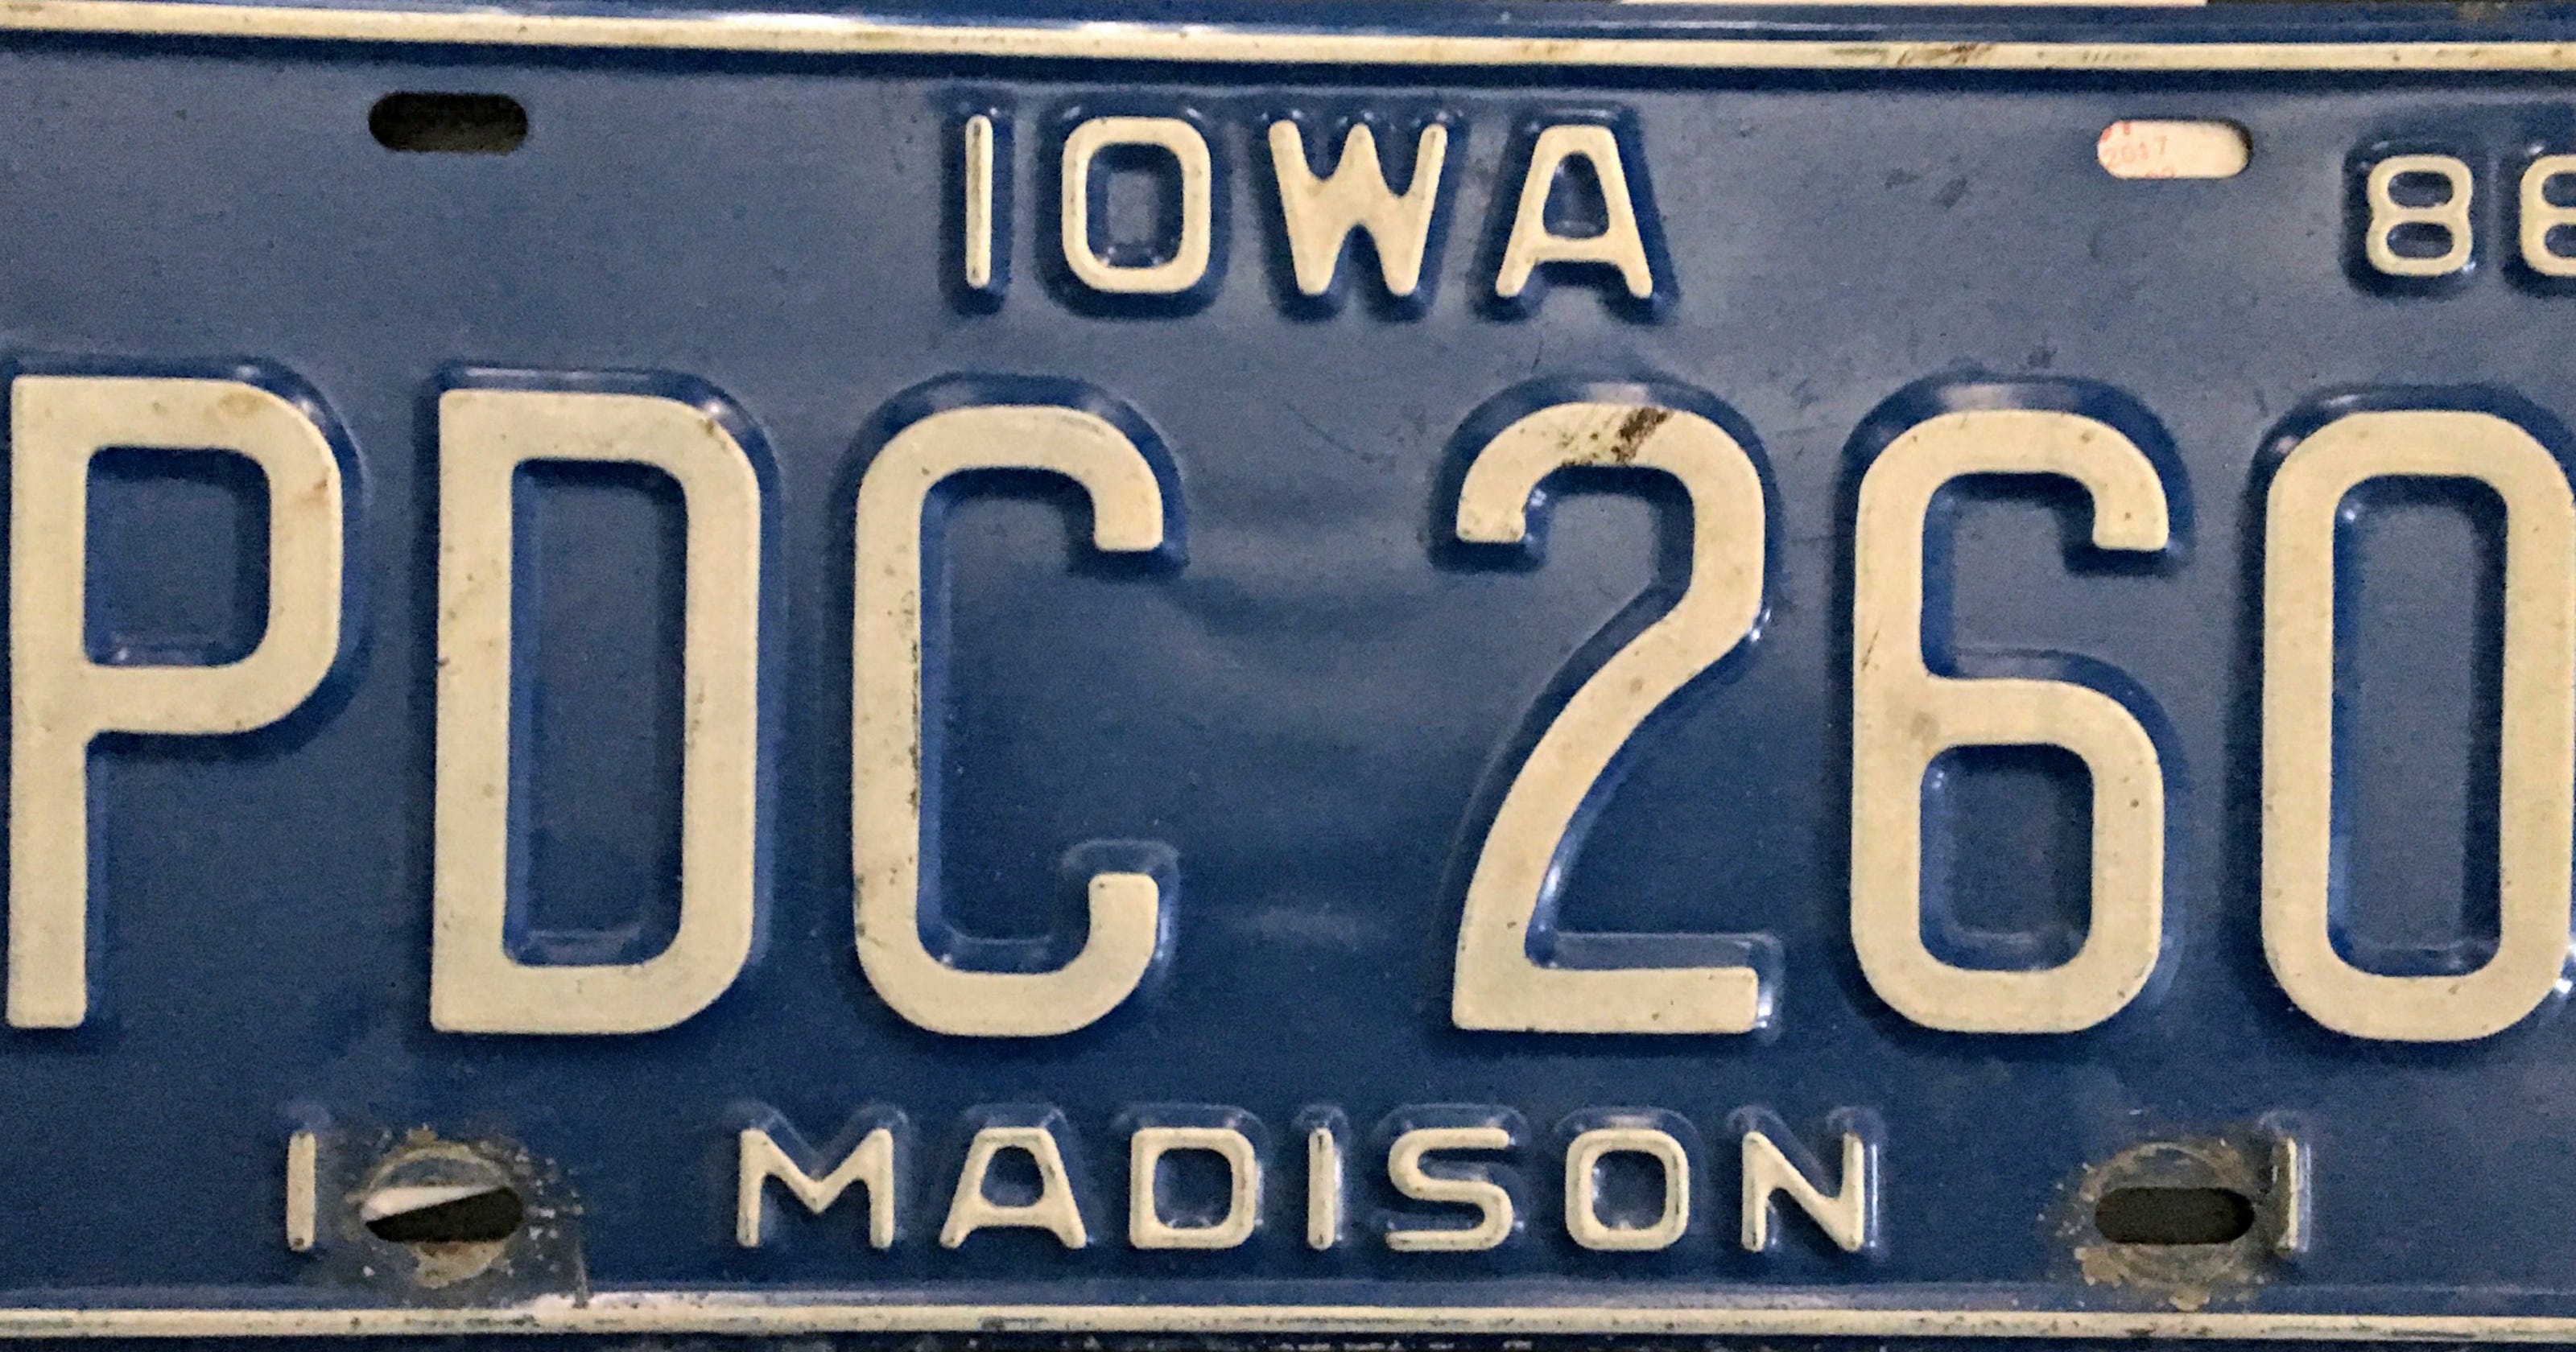 The Iowa license plate debate is silly